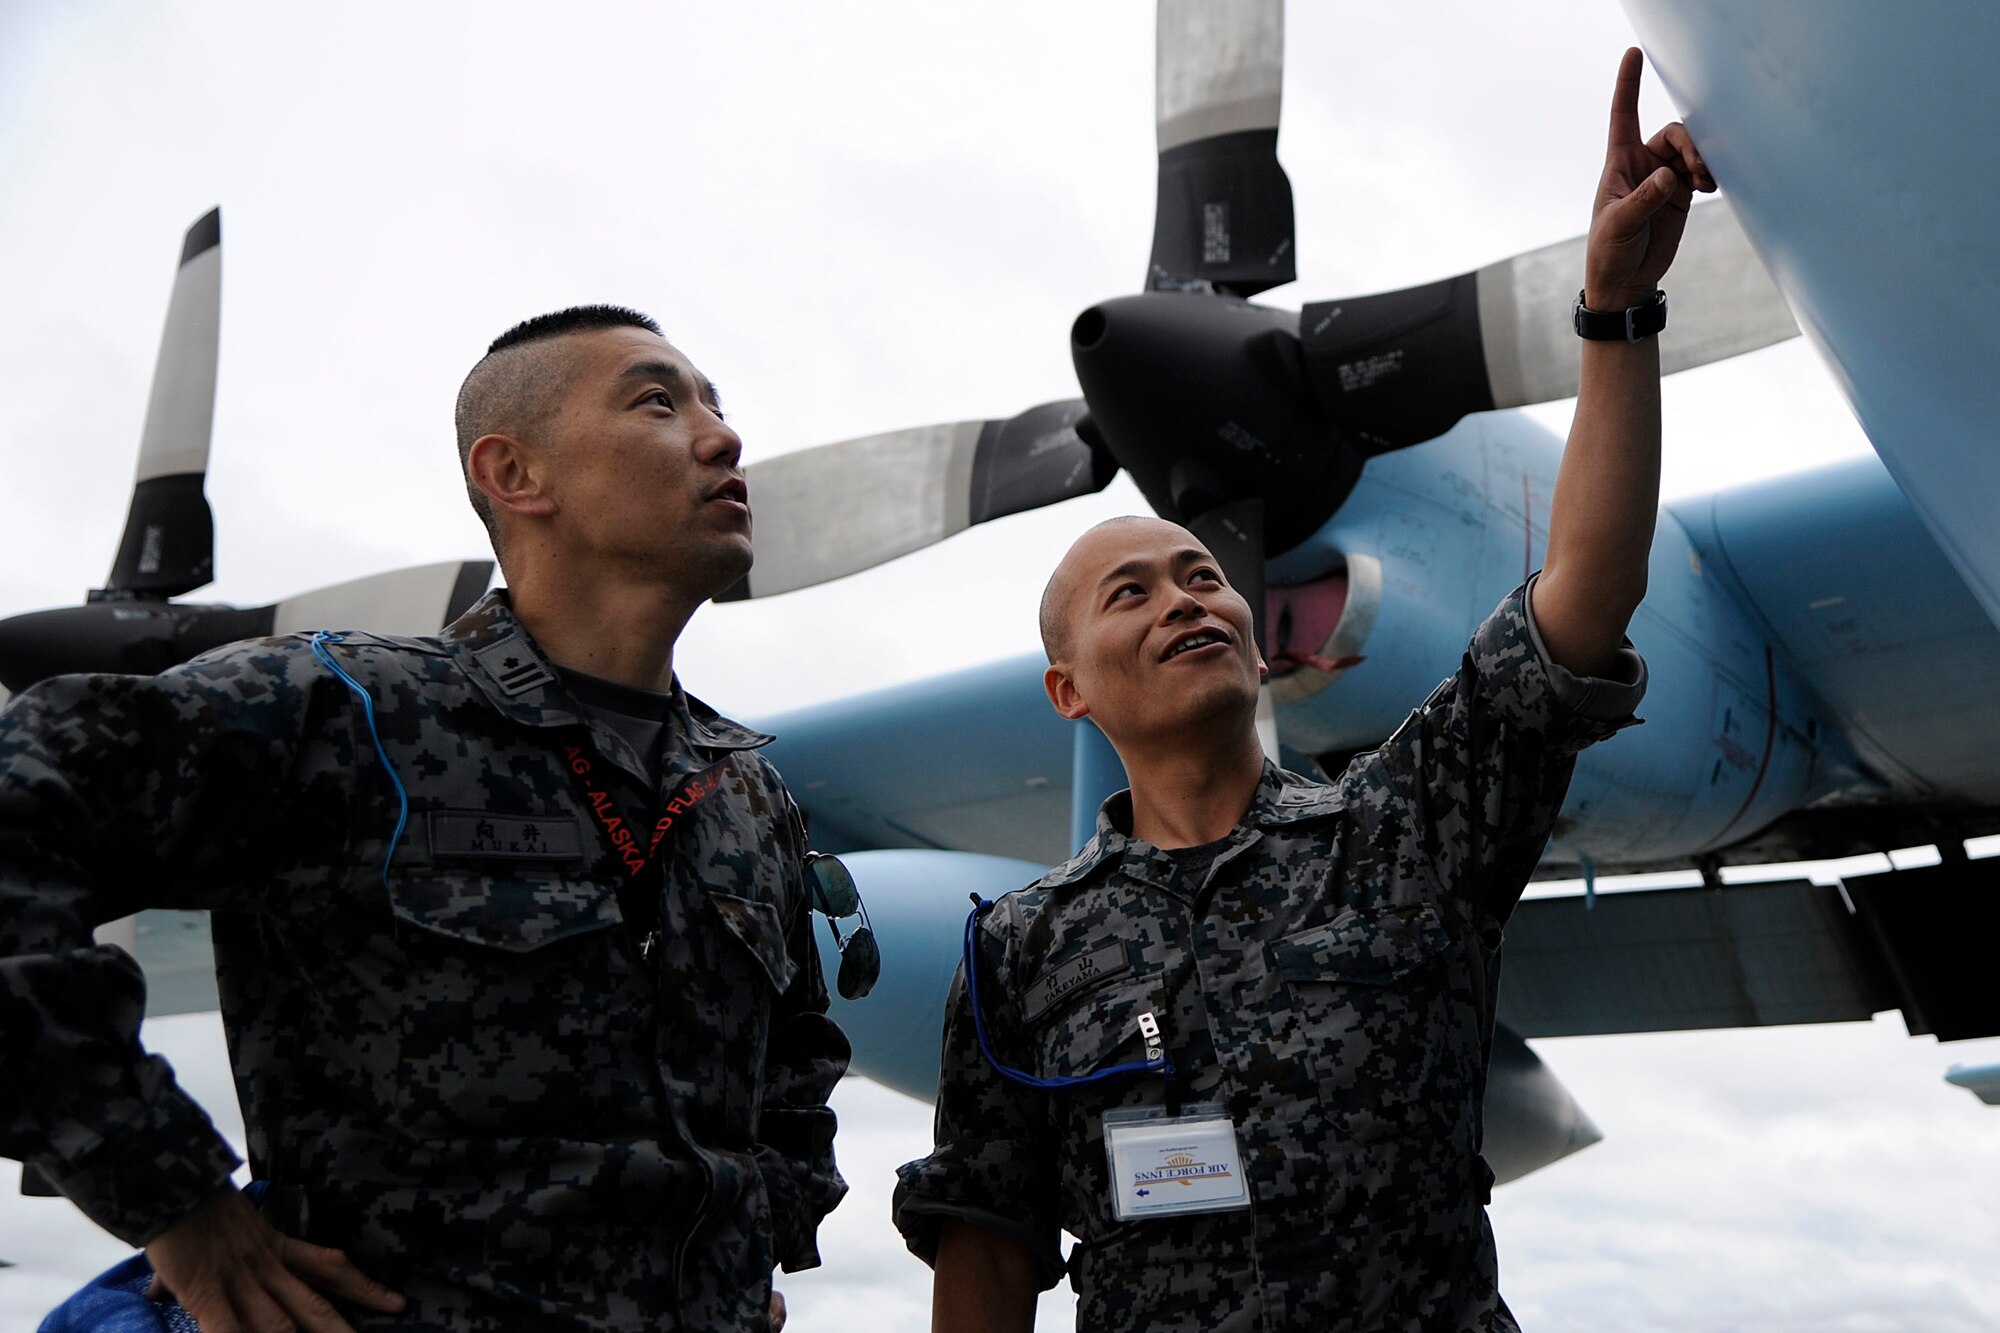 Members of the Japanese Air Self Defense Force inspect a Japanese C-130 Hercules during Red Flag - Alaska on the flight line of Joint Base Elmendorf-Richardson, Alaska June 19. The C-130 Hercules offers a maximum speed of 600 kilometers an hour with a payload of 19,400 pounds and can be used for air drops. Red-Flag Alaska is designed to strengthen bilateral ties between nations and offers the JASDF the opportunity to improve aerial tactics. (U.S. Air Force photo/Staff Sgt. Zachary Wolf)